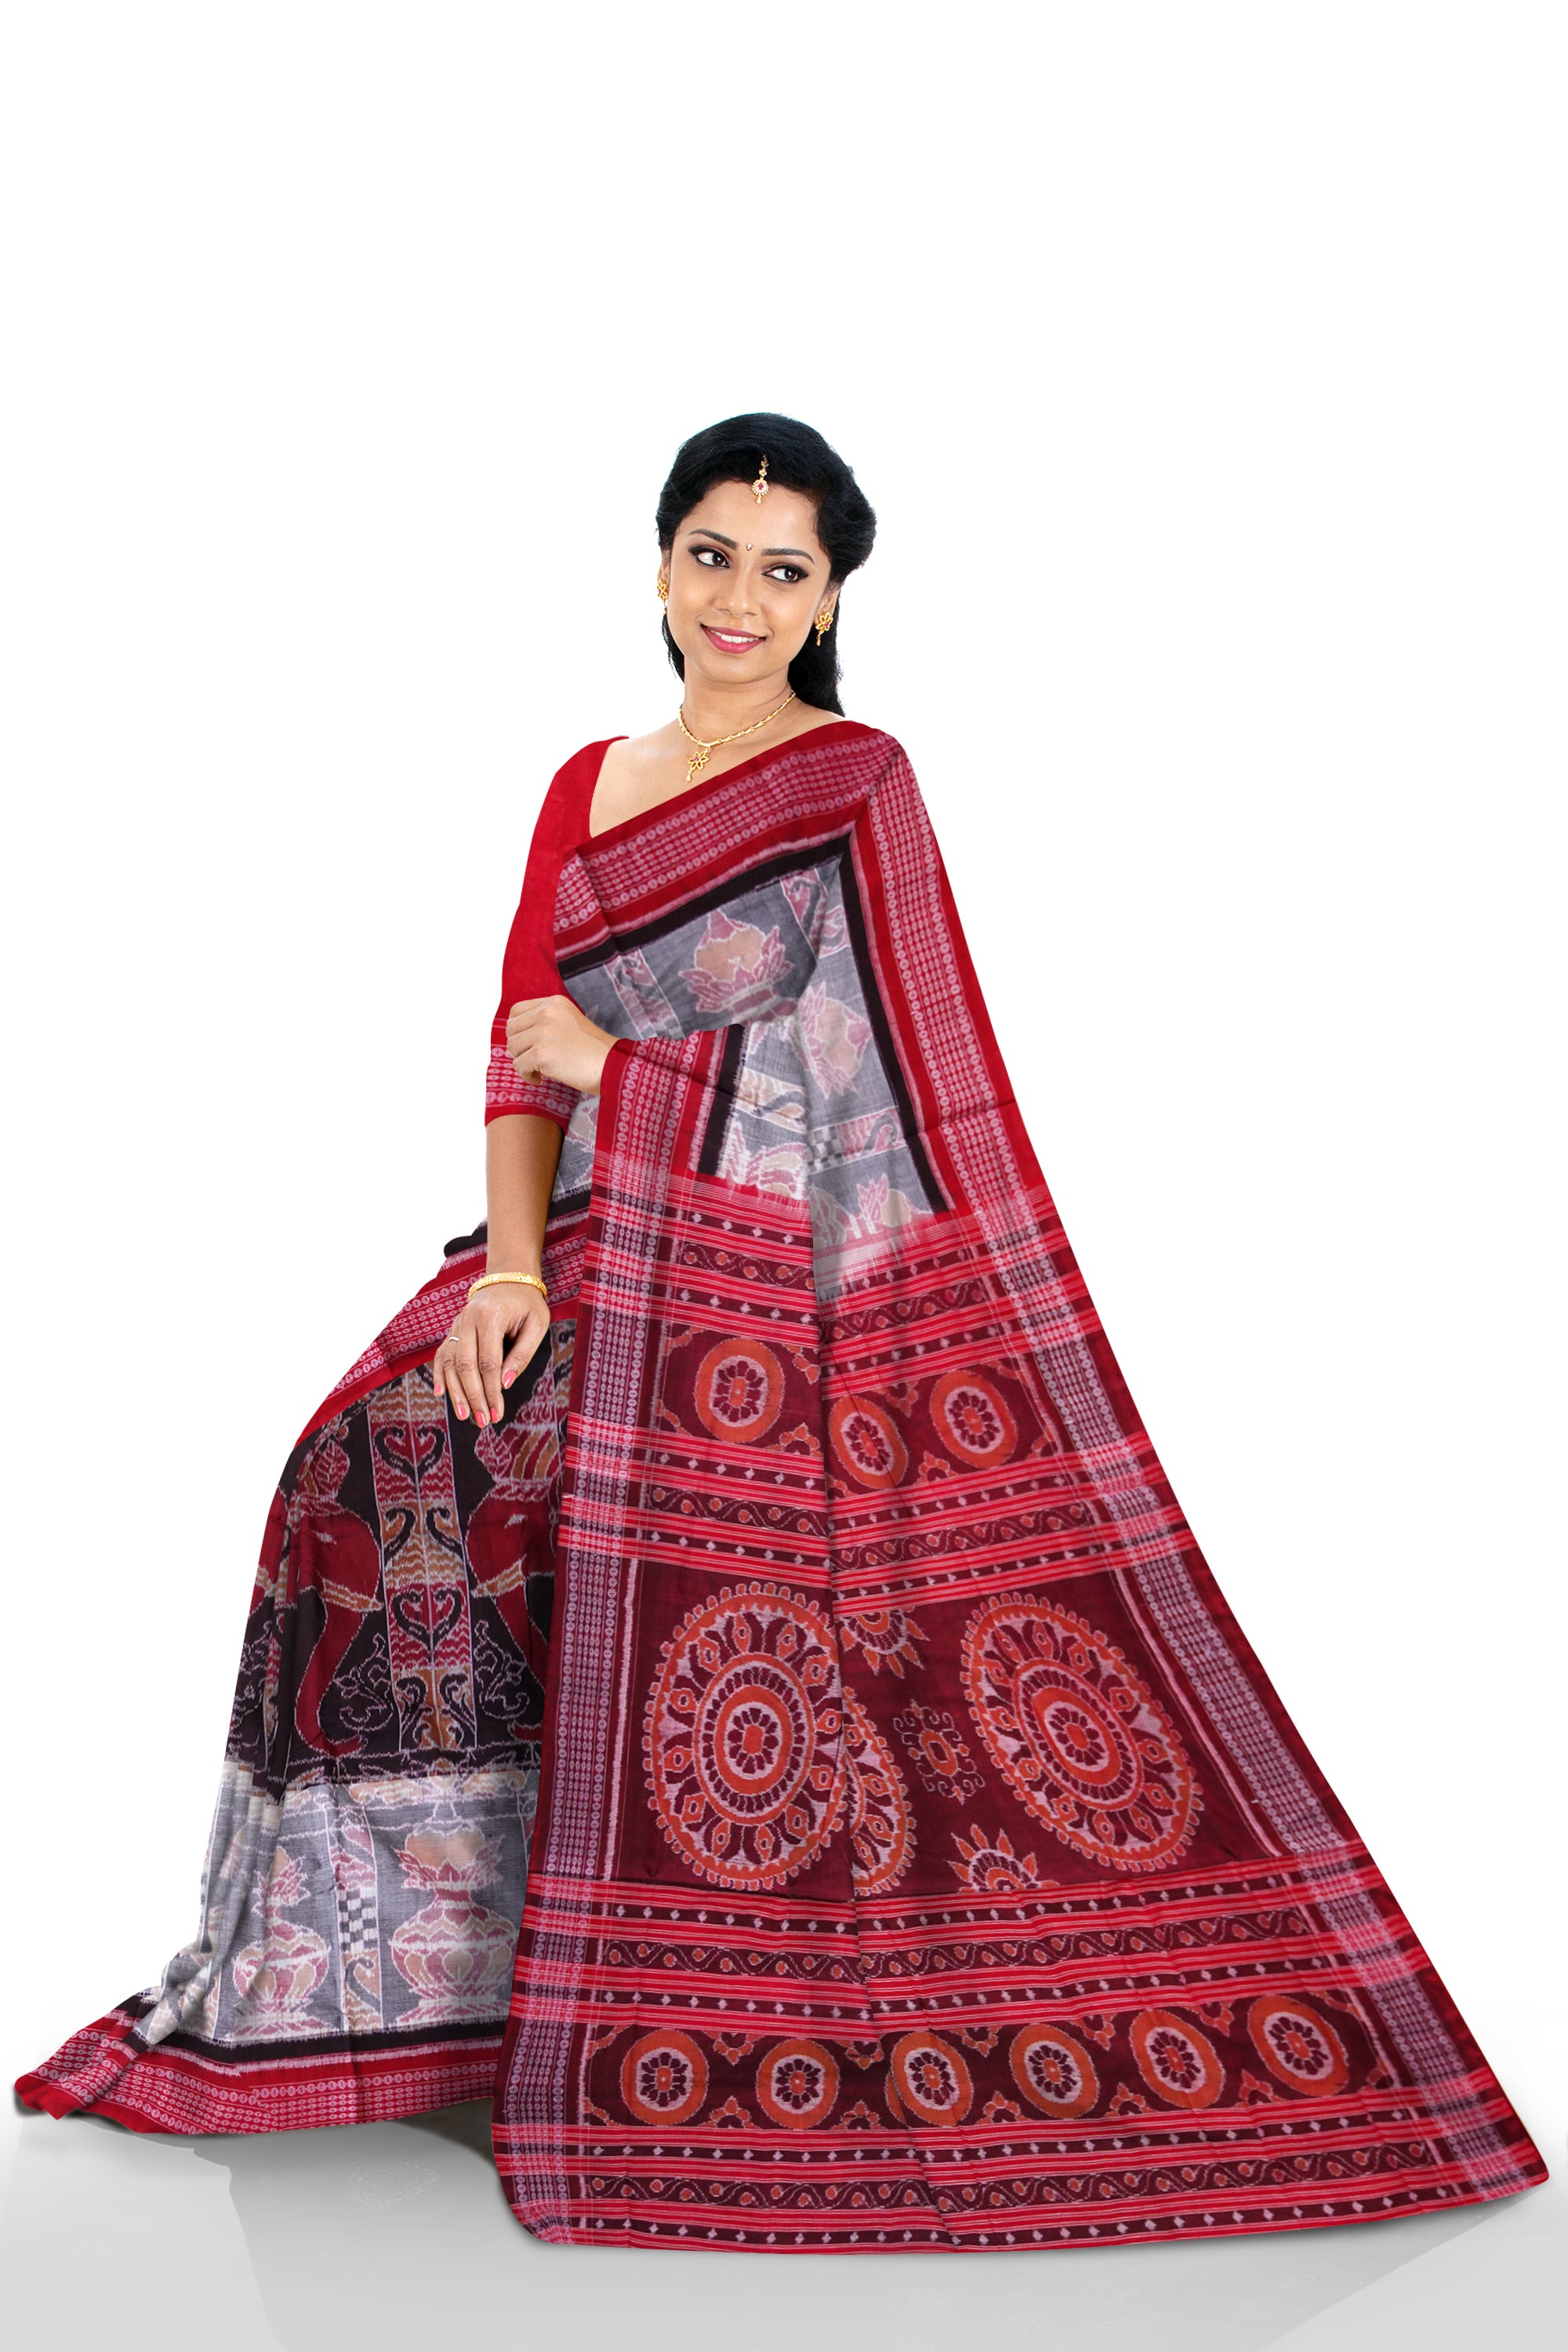 Royal Elephant and Kalasha design in traditionally work on full body in Black , white and red colour pure cotton saree. - Koshali Arts & Crafts Enterprise